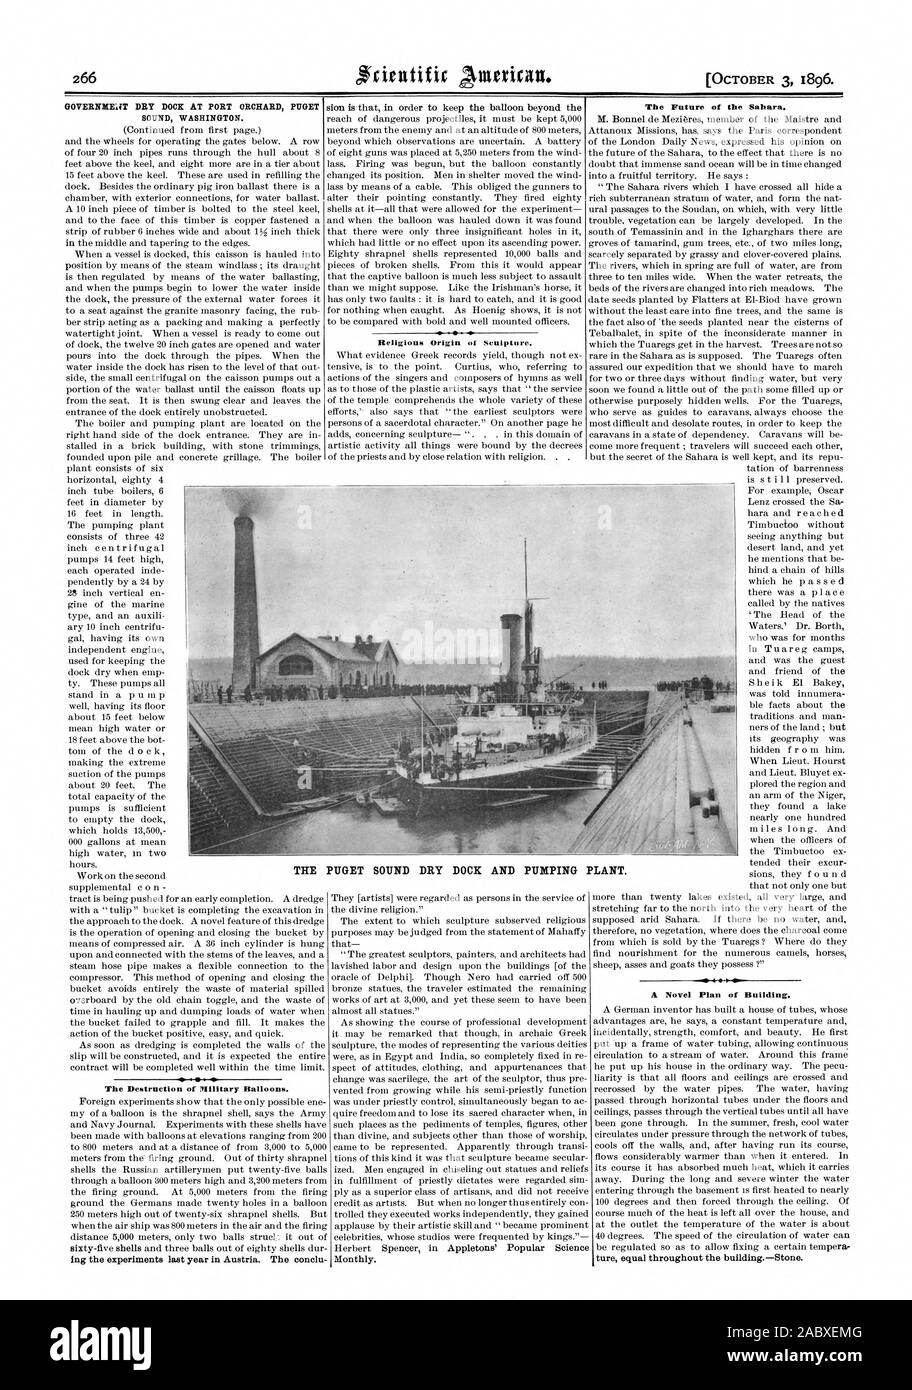 GOVERNHEIIT DRY DOCK AT PORT ORCHARD PUGET SOUND WASHINGTON. The Destruction of Military Balloons. The Future of the Sahara. A Novel Plan of Building. ture equal throughout the buildingStone. Religious Origin ol Sculpture. Monthly. THE PUGET SOUND DRY DOCK AND PUMPING PLANT., scientific american, 1896-10-03 Stock Photo